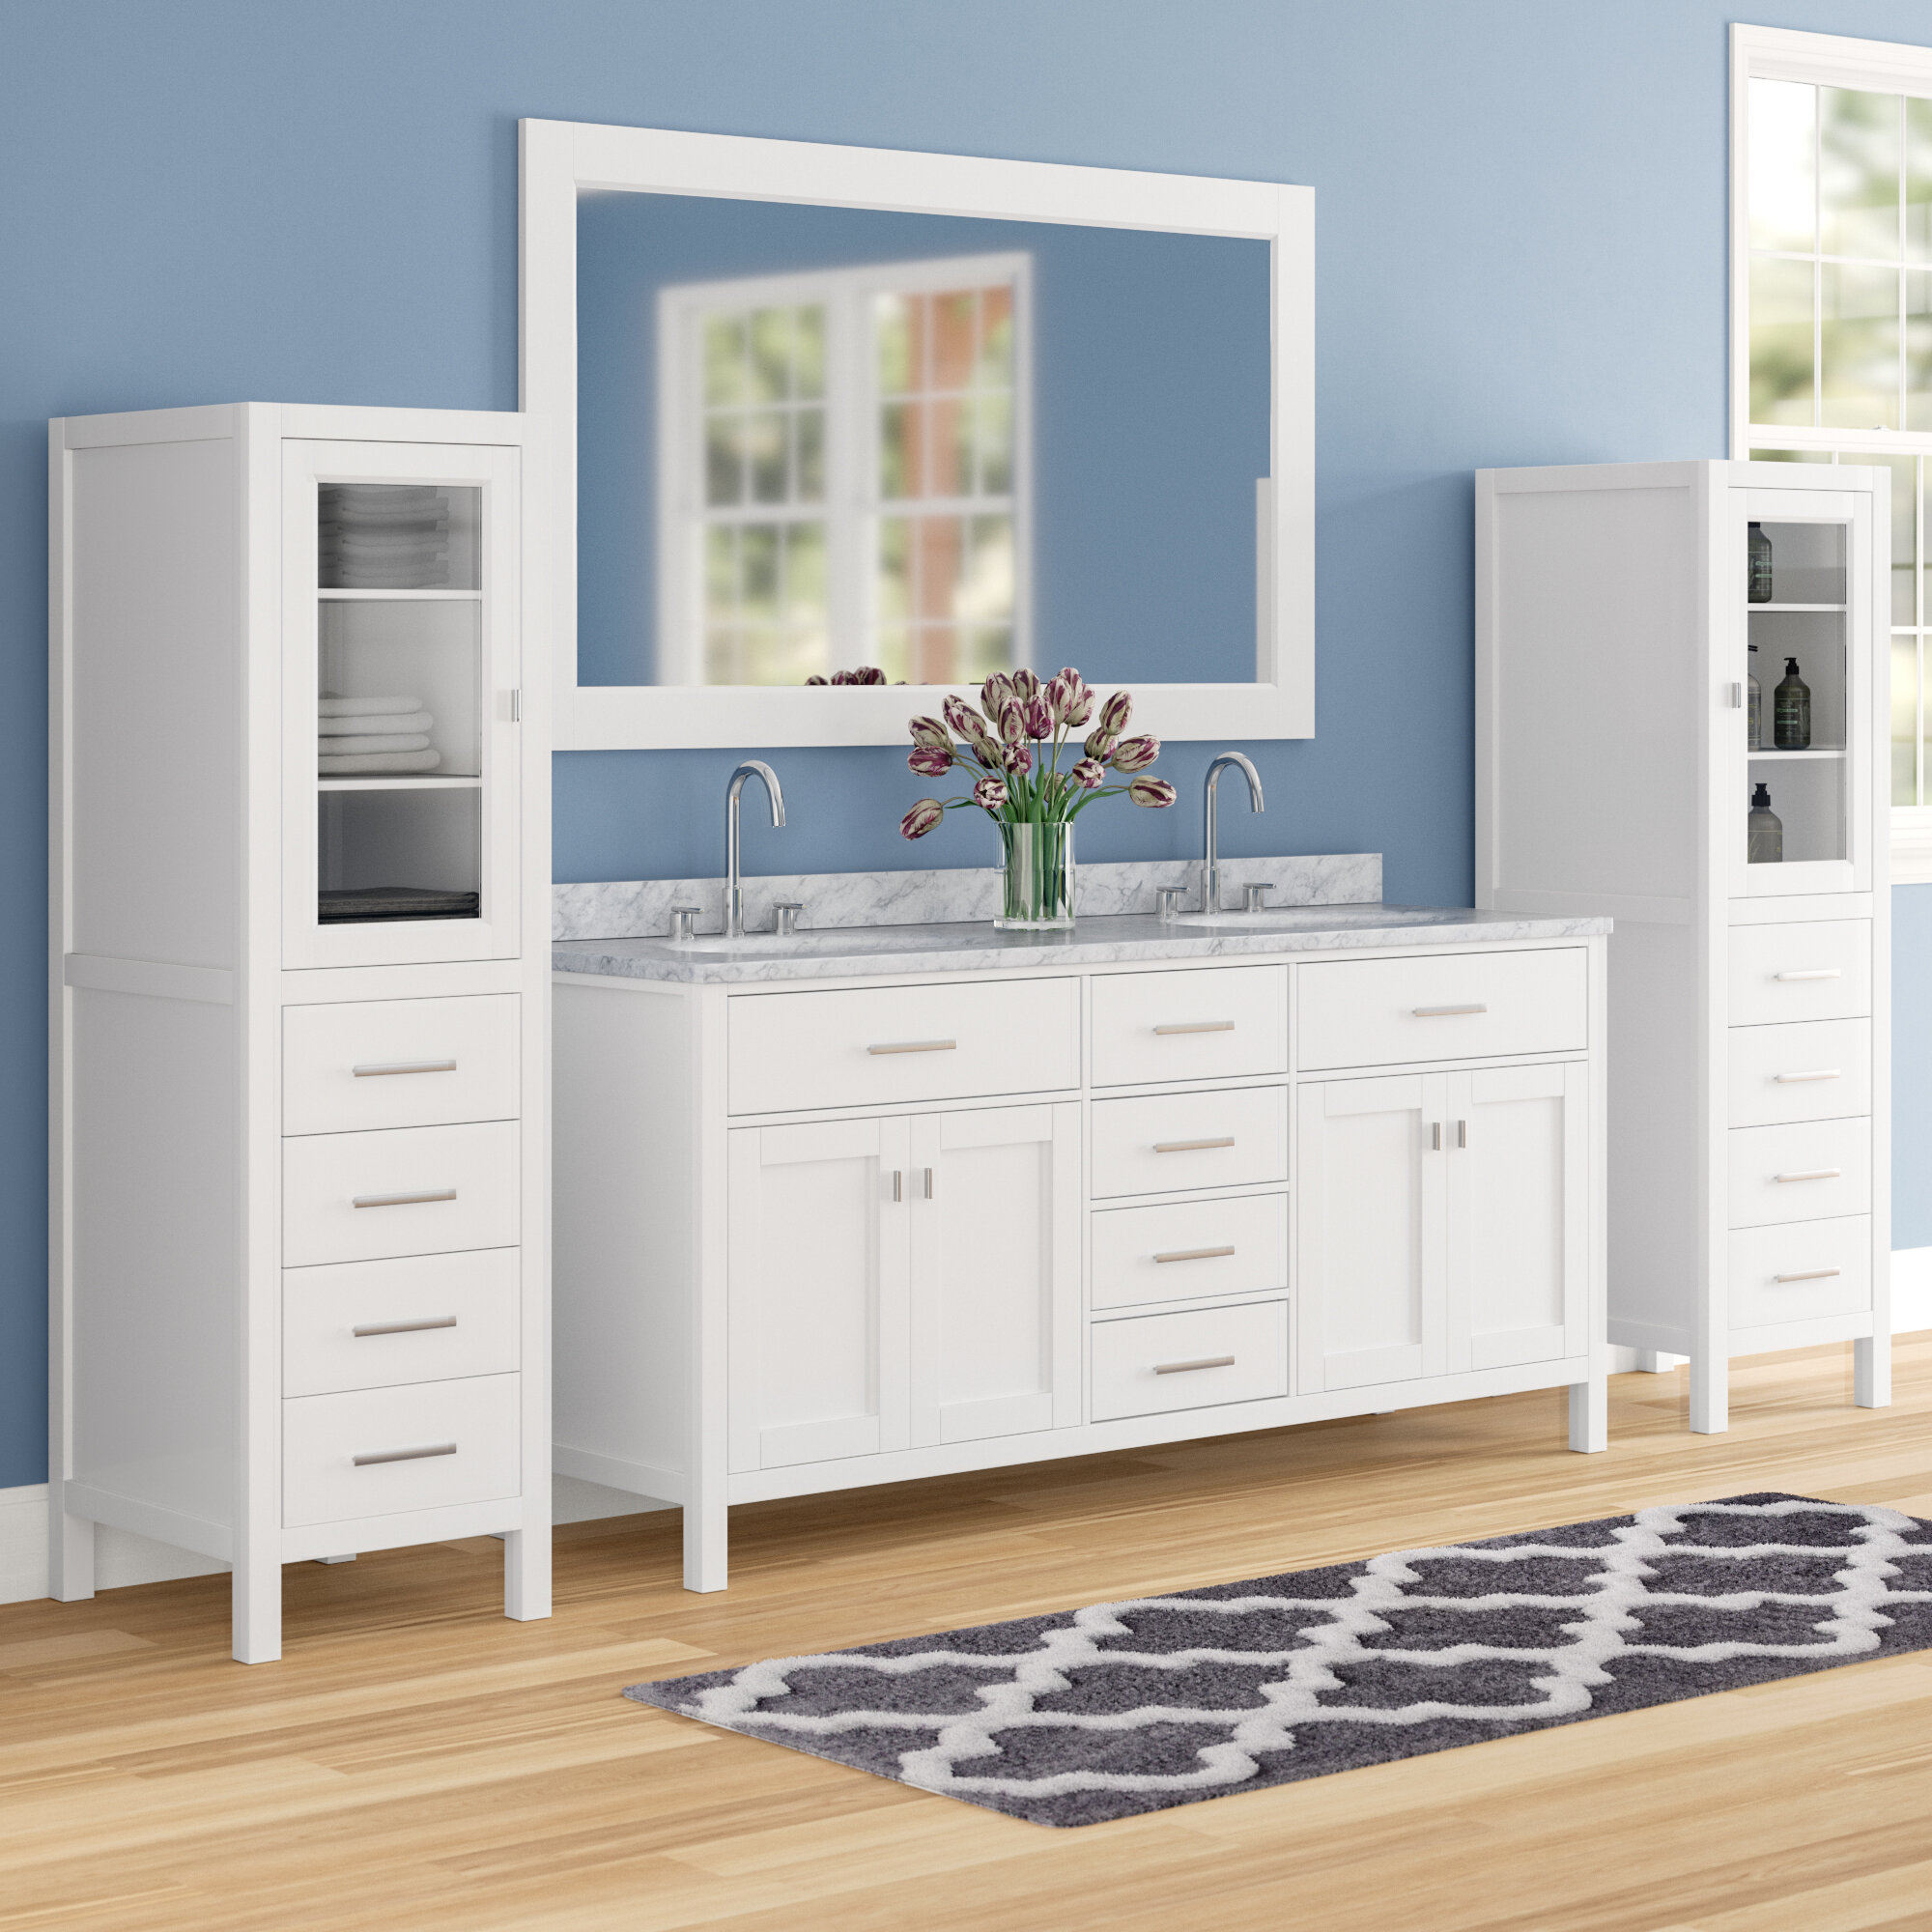 Bathroom Vanity And Linen Cabinet Combo Youll Love In 2021 Visualhunt